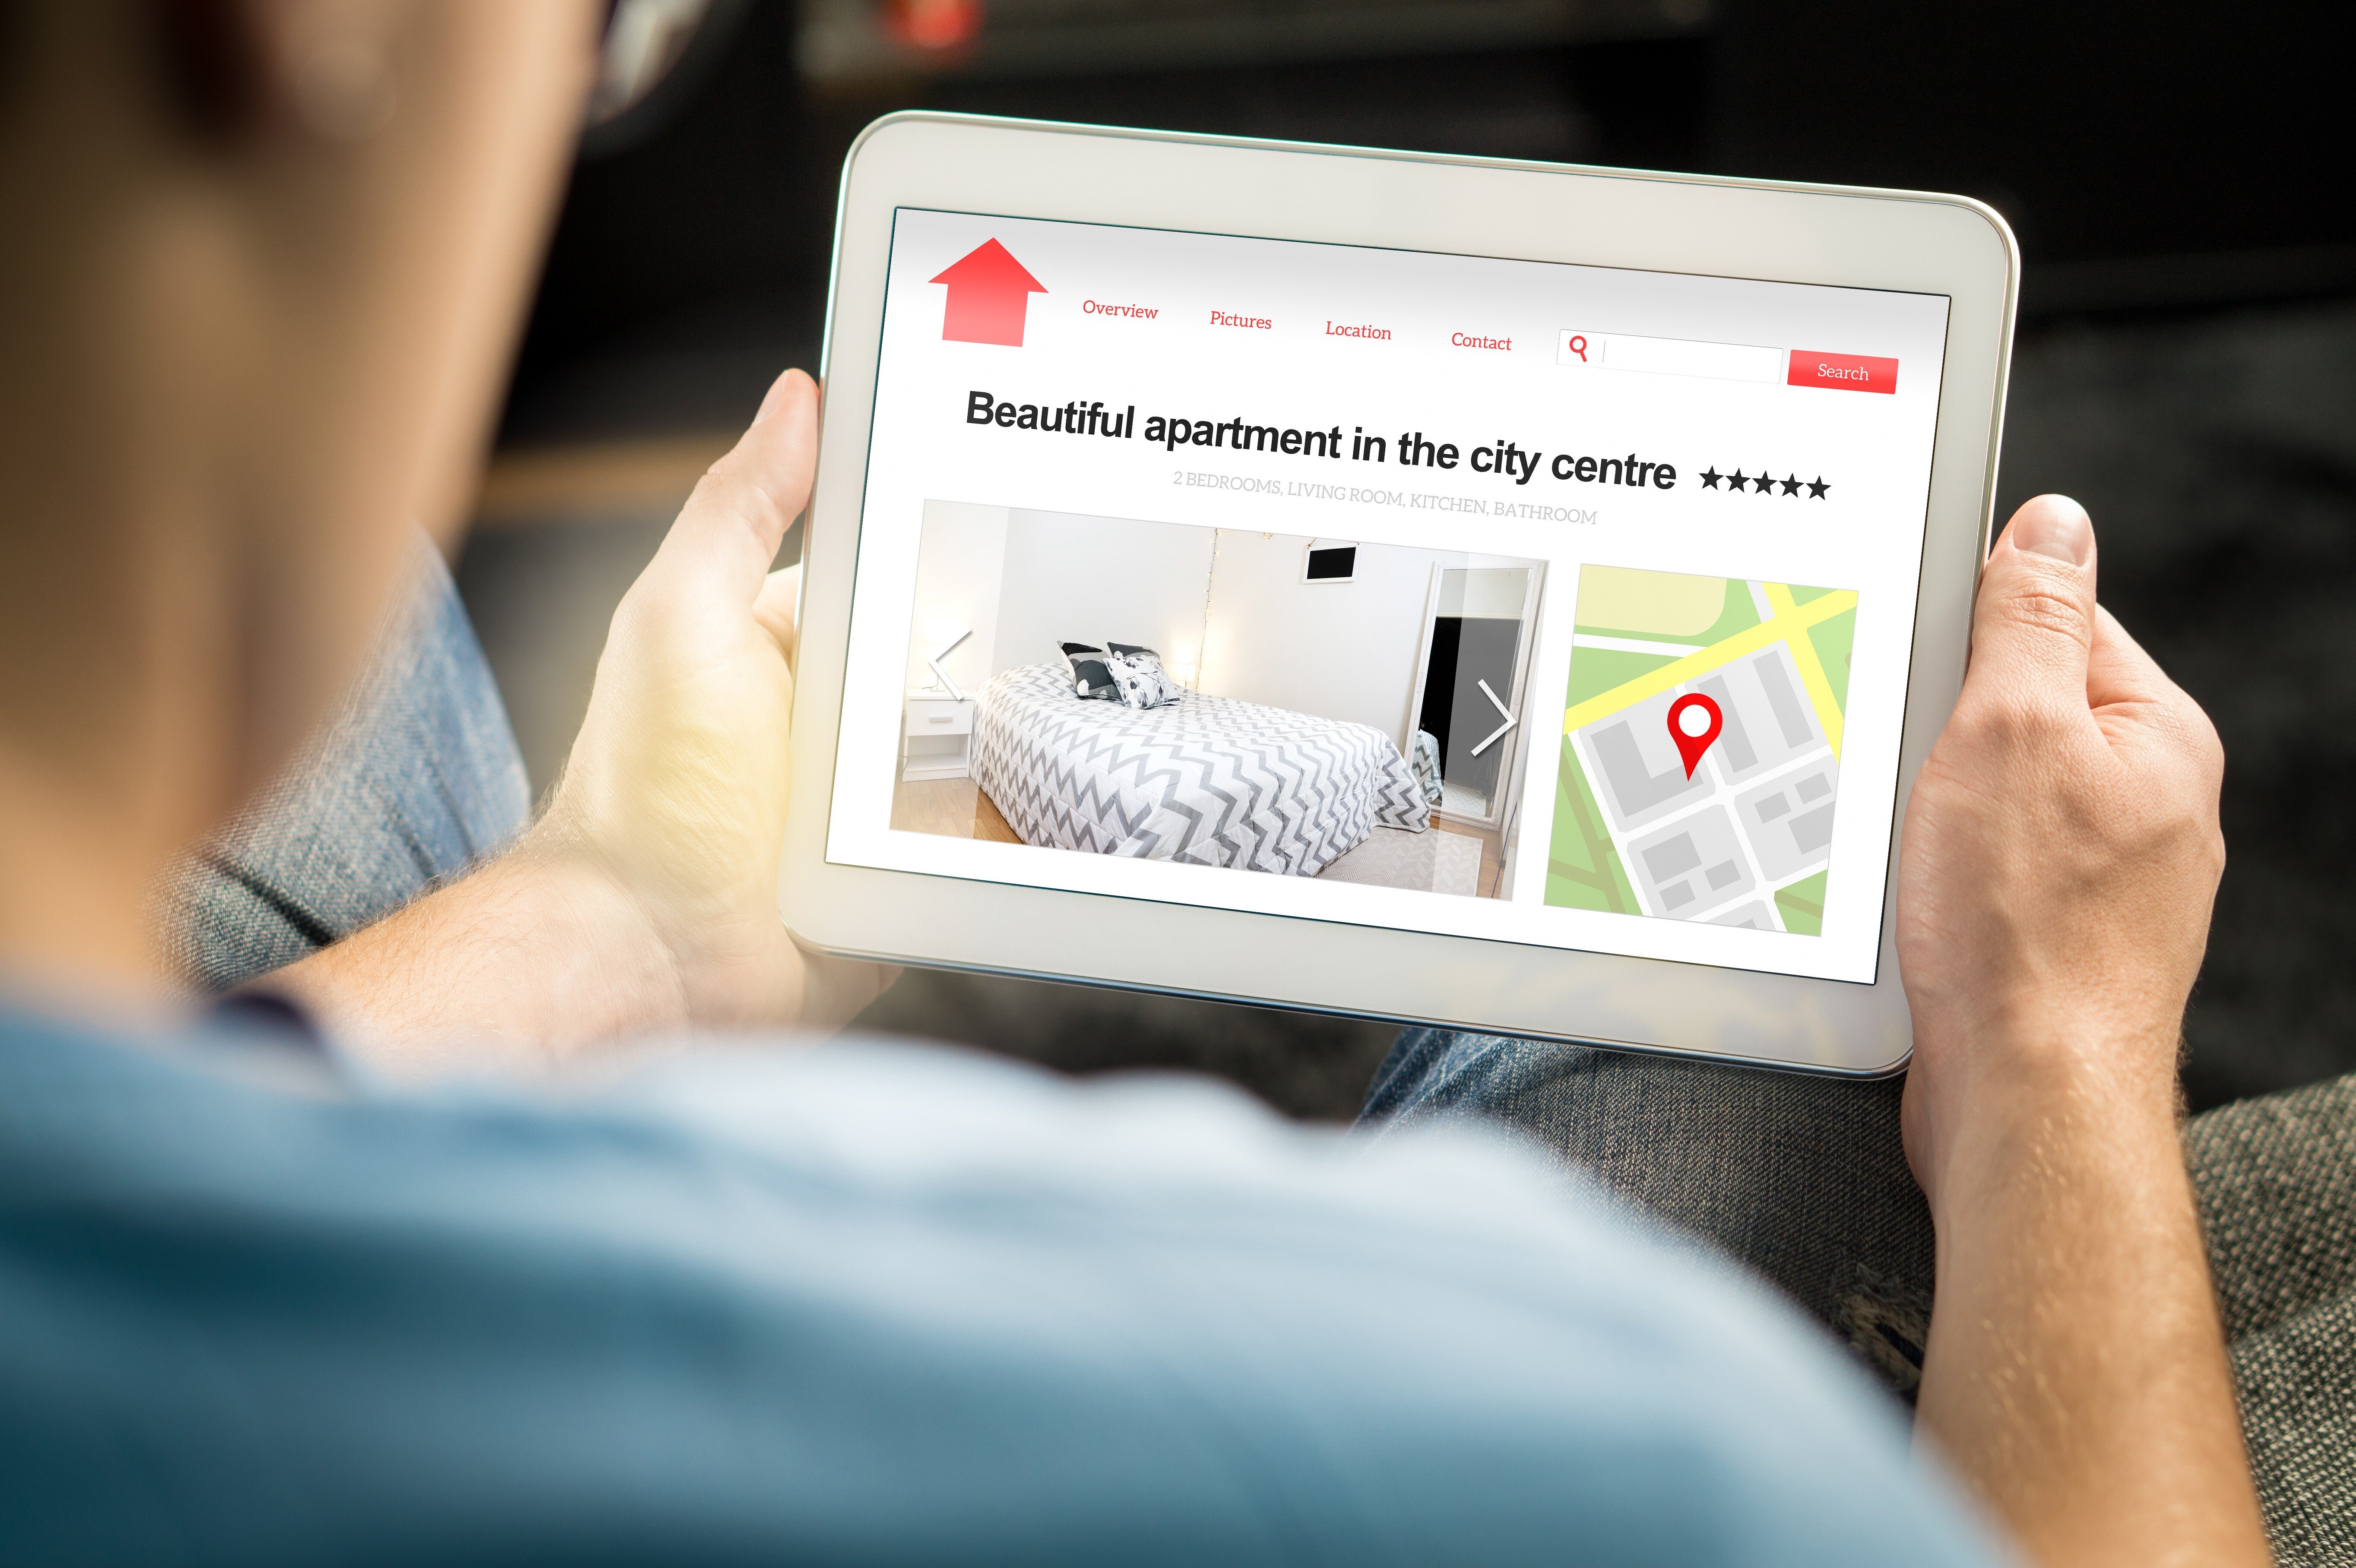 Property is the latest item that buyers are looking to buy online. Photo: Shutterstock